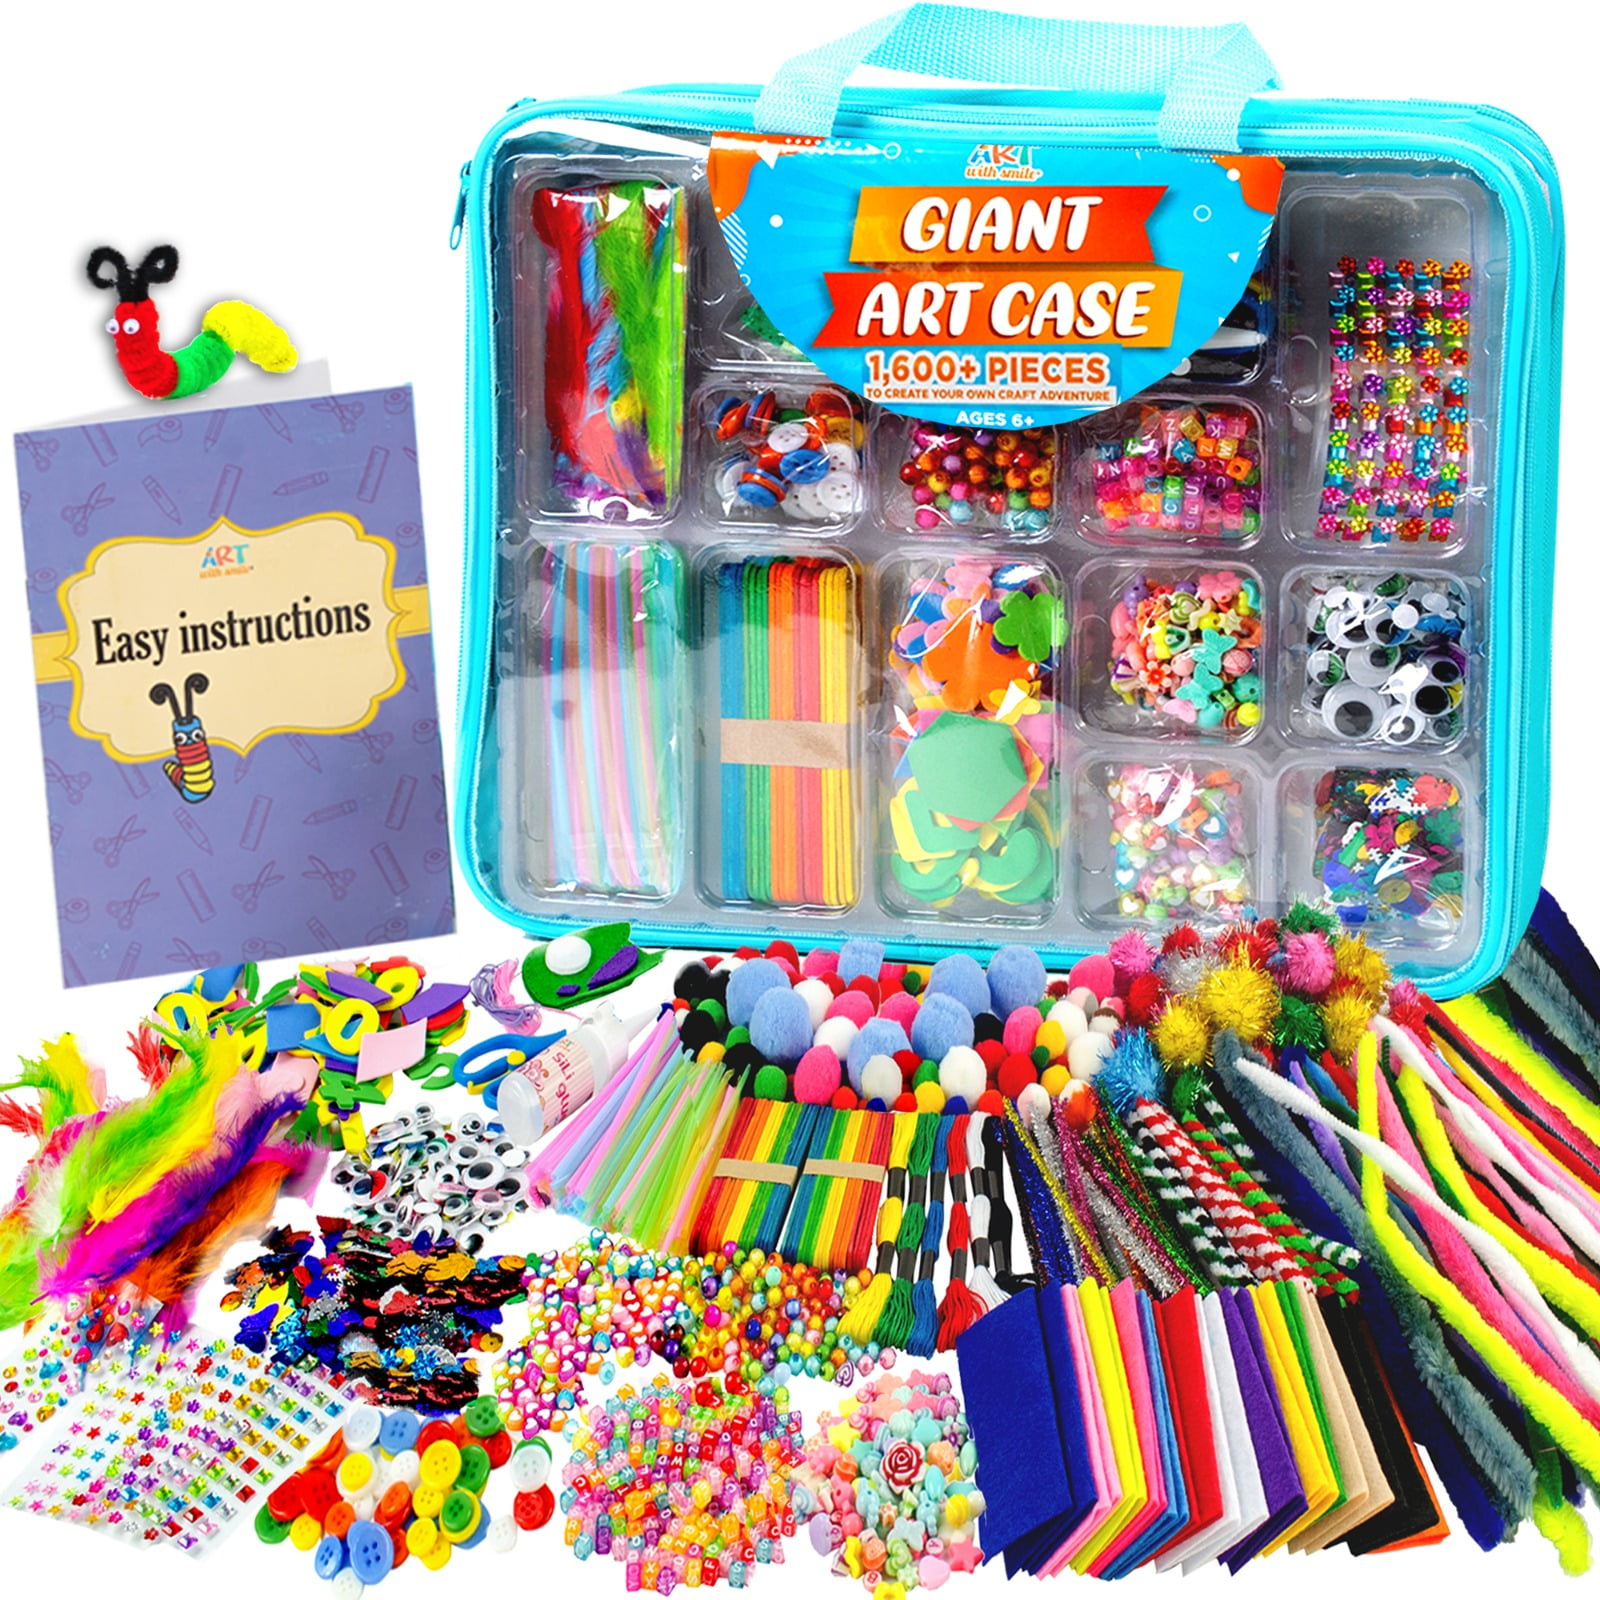 Pearoft Crafts for Kids Age 4-6, 6-8, 8-12 Arts and Crafts Supplies for Kids  Craft Kits for Kids with Construction Paper & Craft Tools, DIY School Craft  Project, 3 4 5 6 7 8 9 Year Old Girls Gifts, 